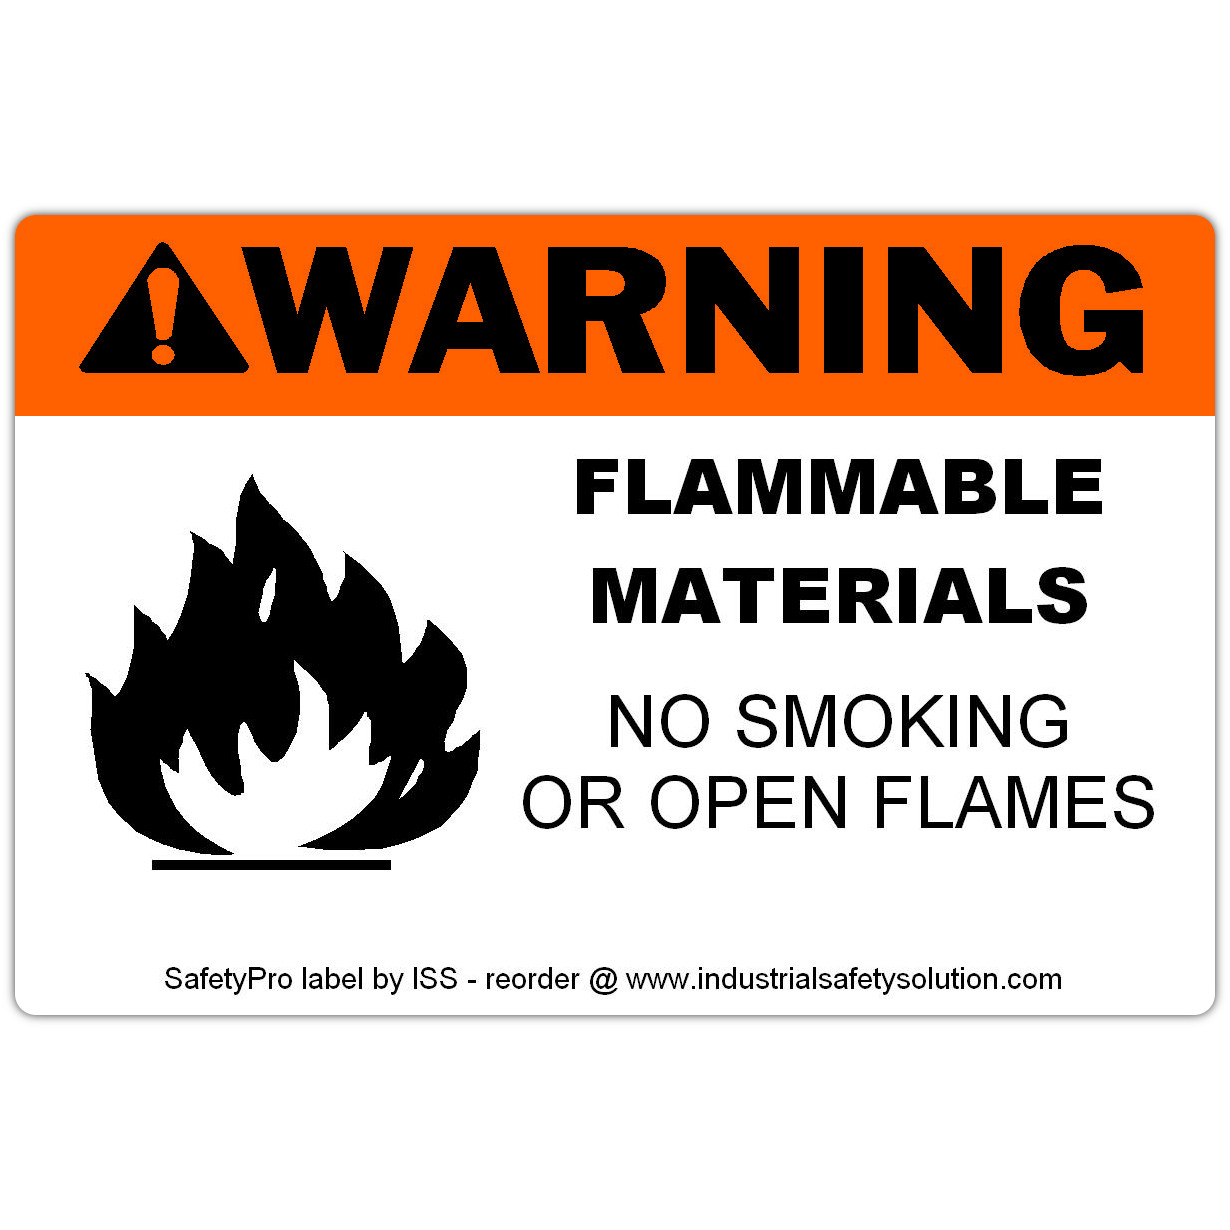 Detail view for 4" x 6" WARNING Flammable Materials Safety Label